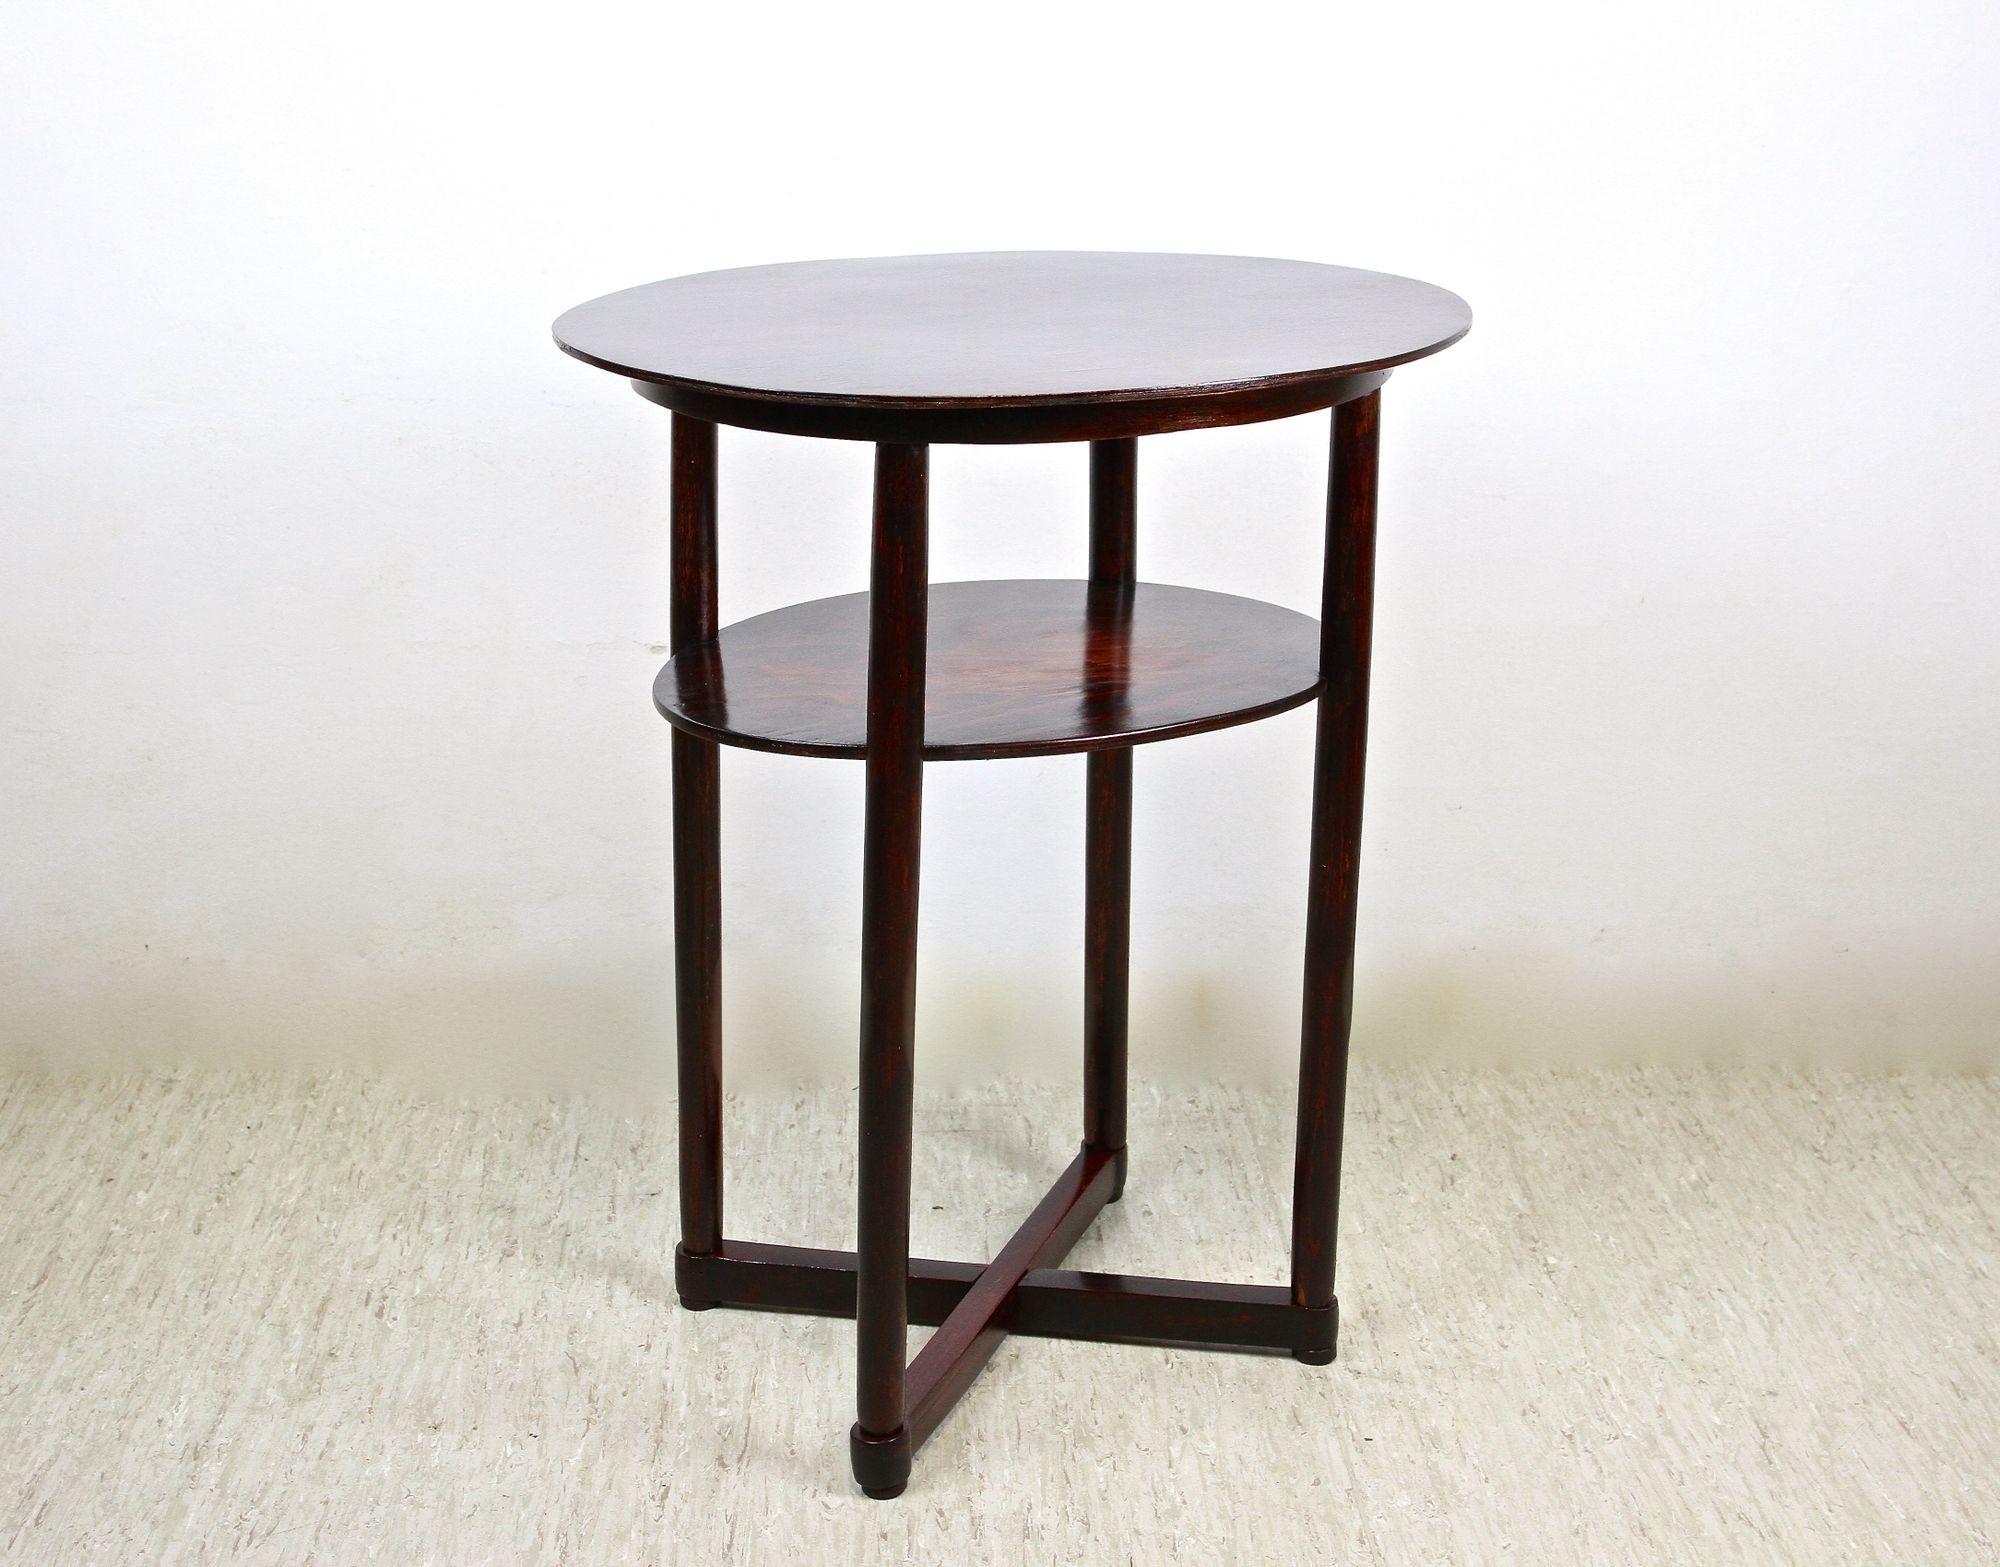 Remarkable Art Nouveau Thonet Side Table from the renowed company of Thonet around 1910. Designed by none other than the world famous Austrian designer and founder of the 